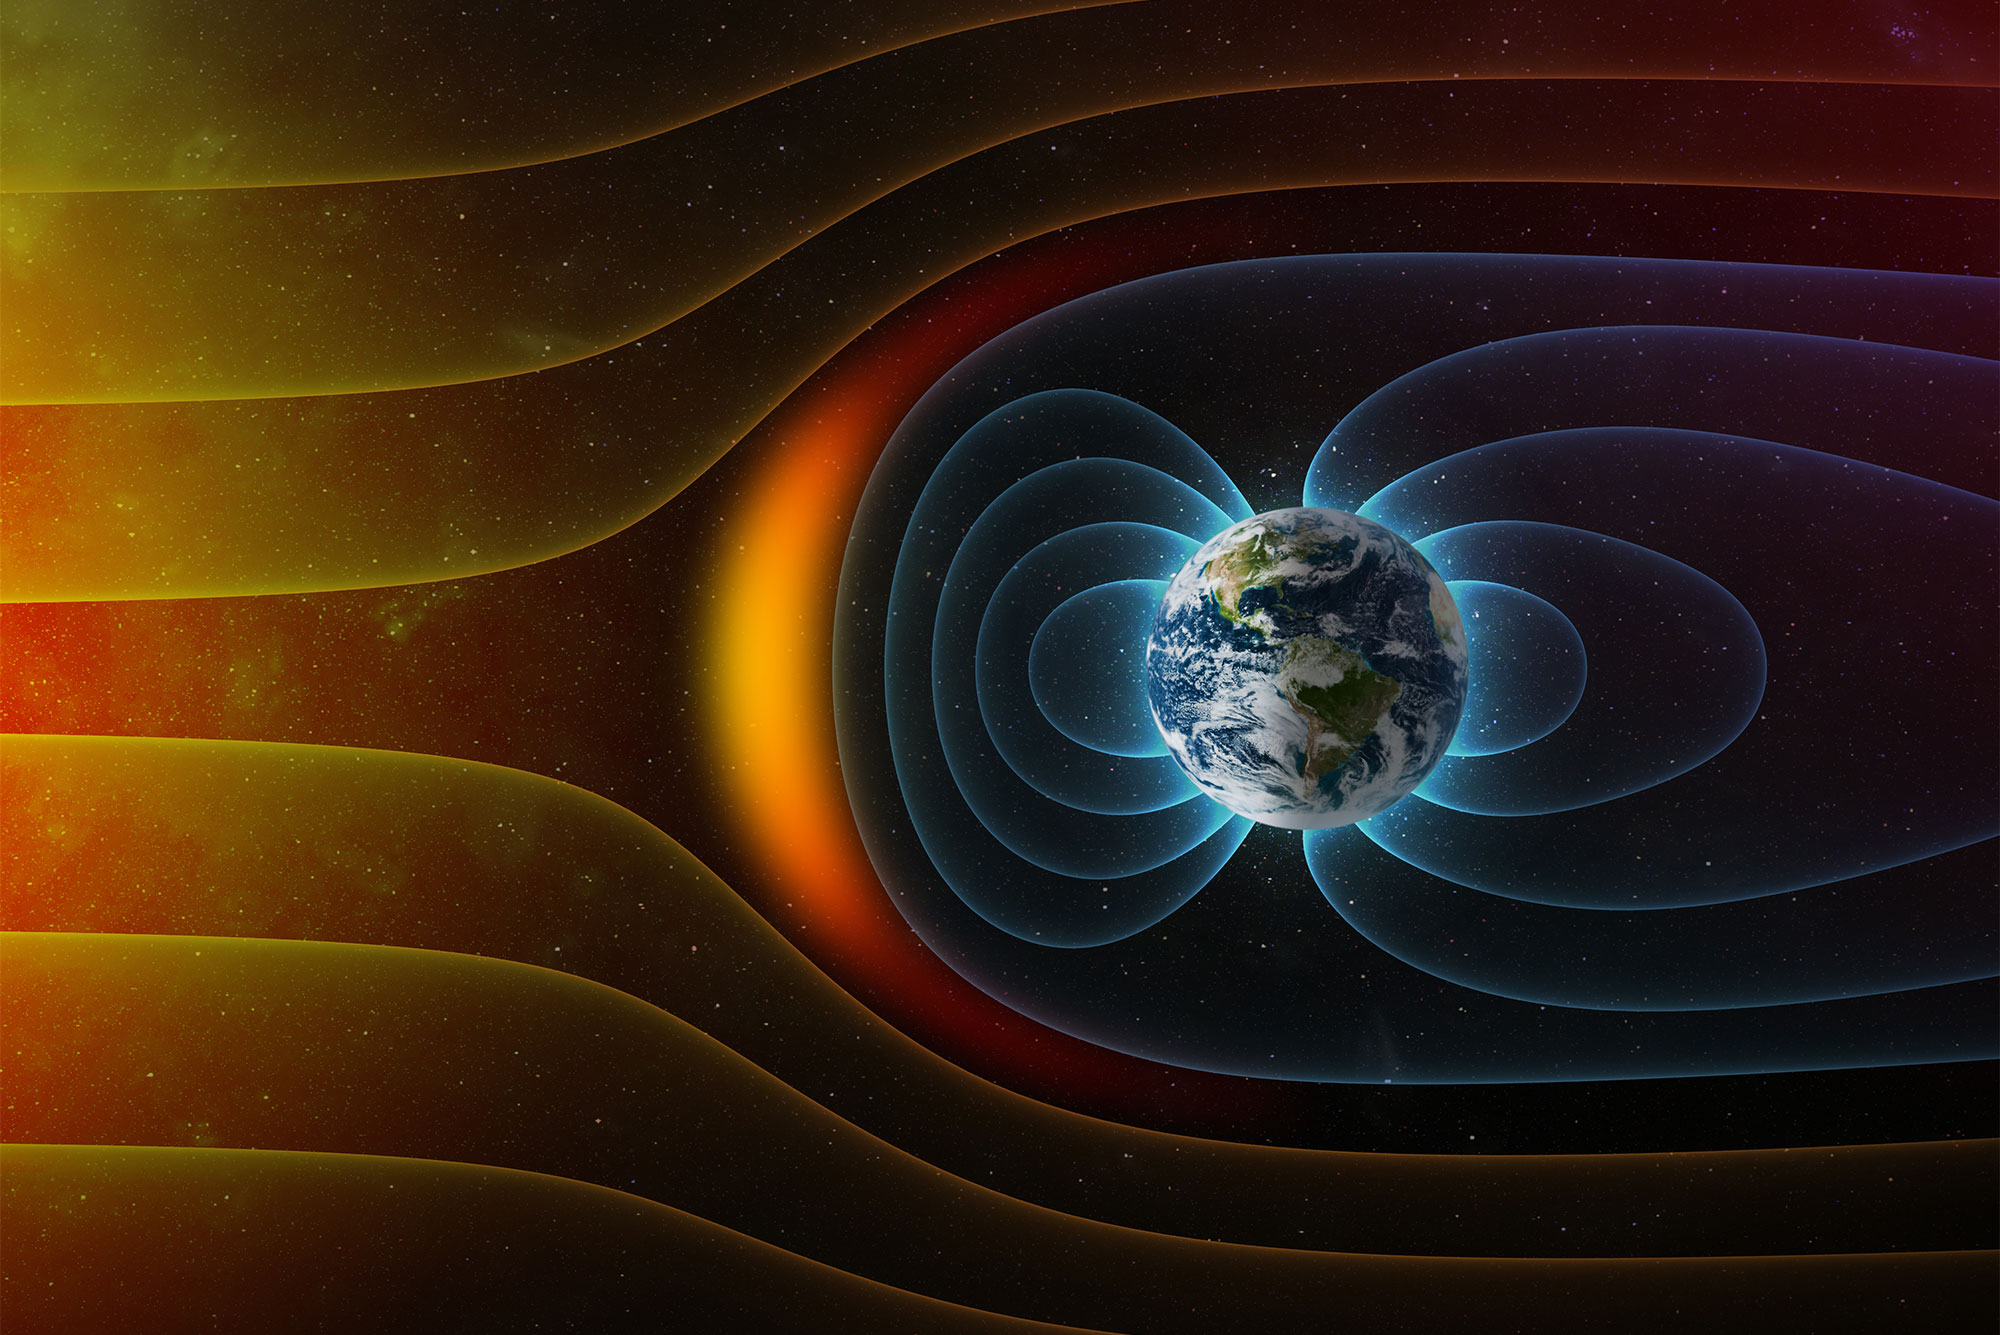 Scientific illustration showing Earth's magnetic field deflecting solar winds from the sun.